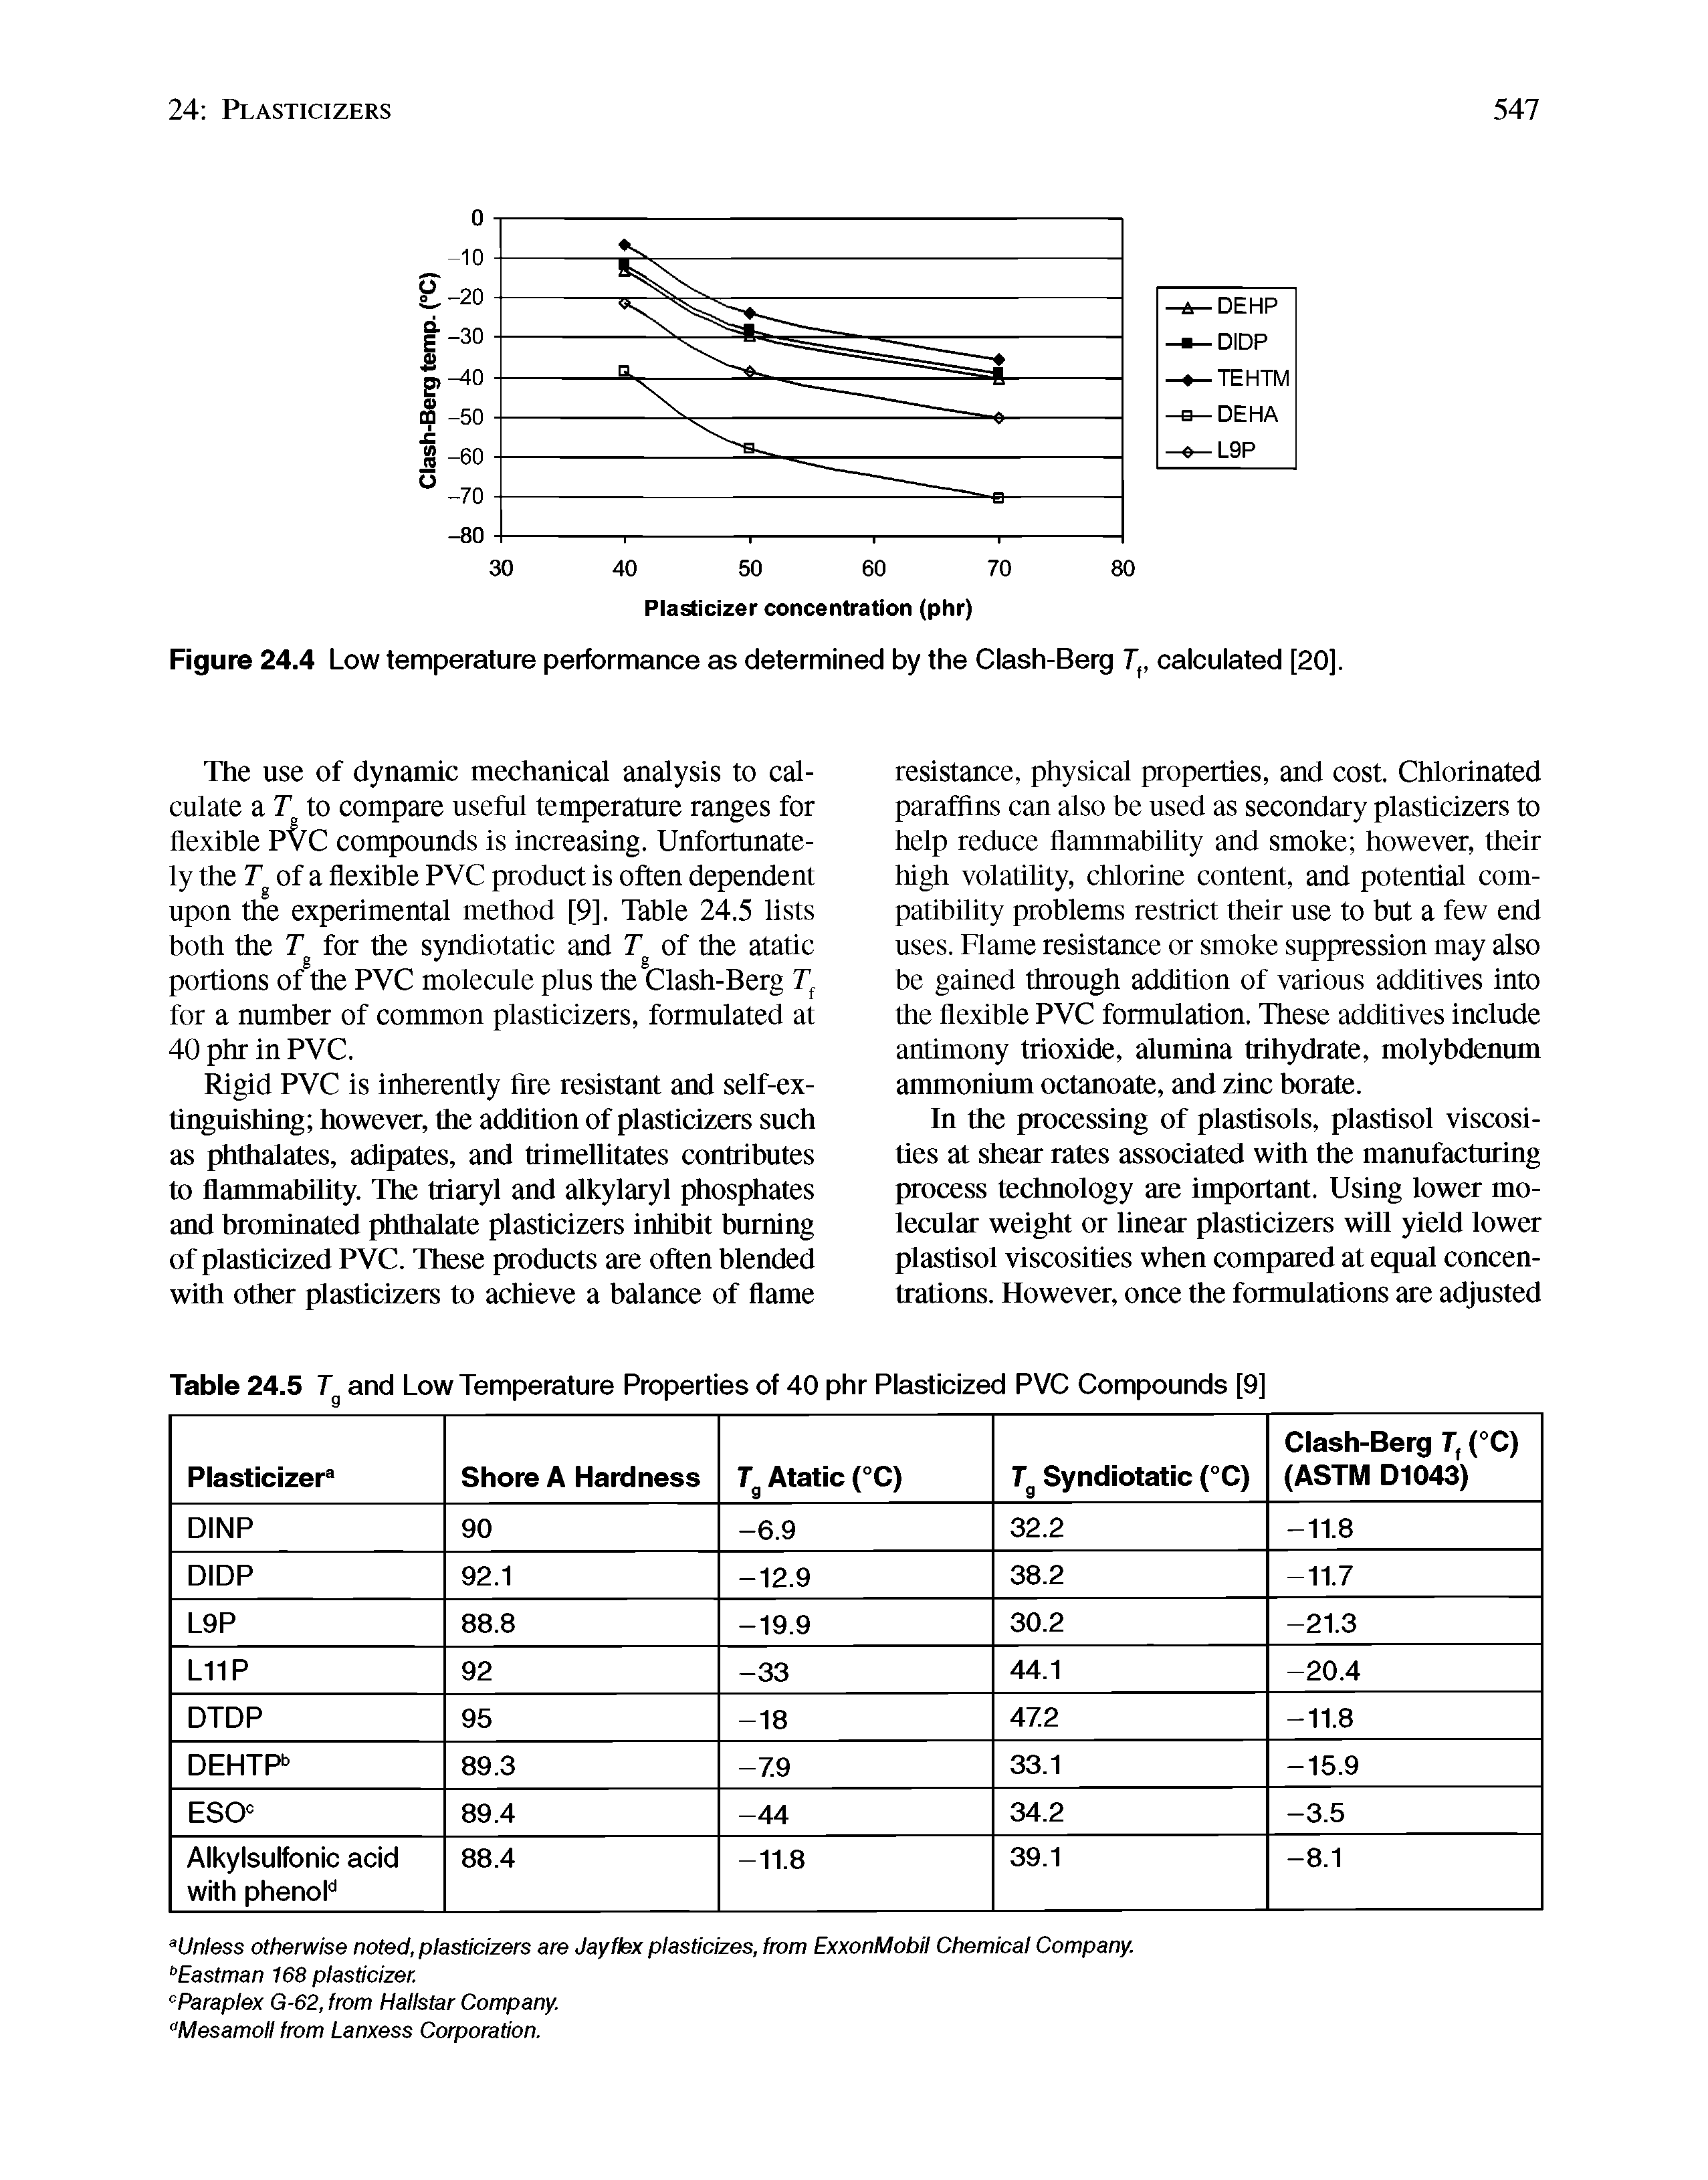 Figure 24.4 Low temperature performance as determined by the Clash-Berg 7, calculated [20].